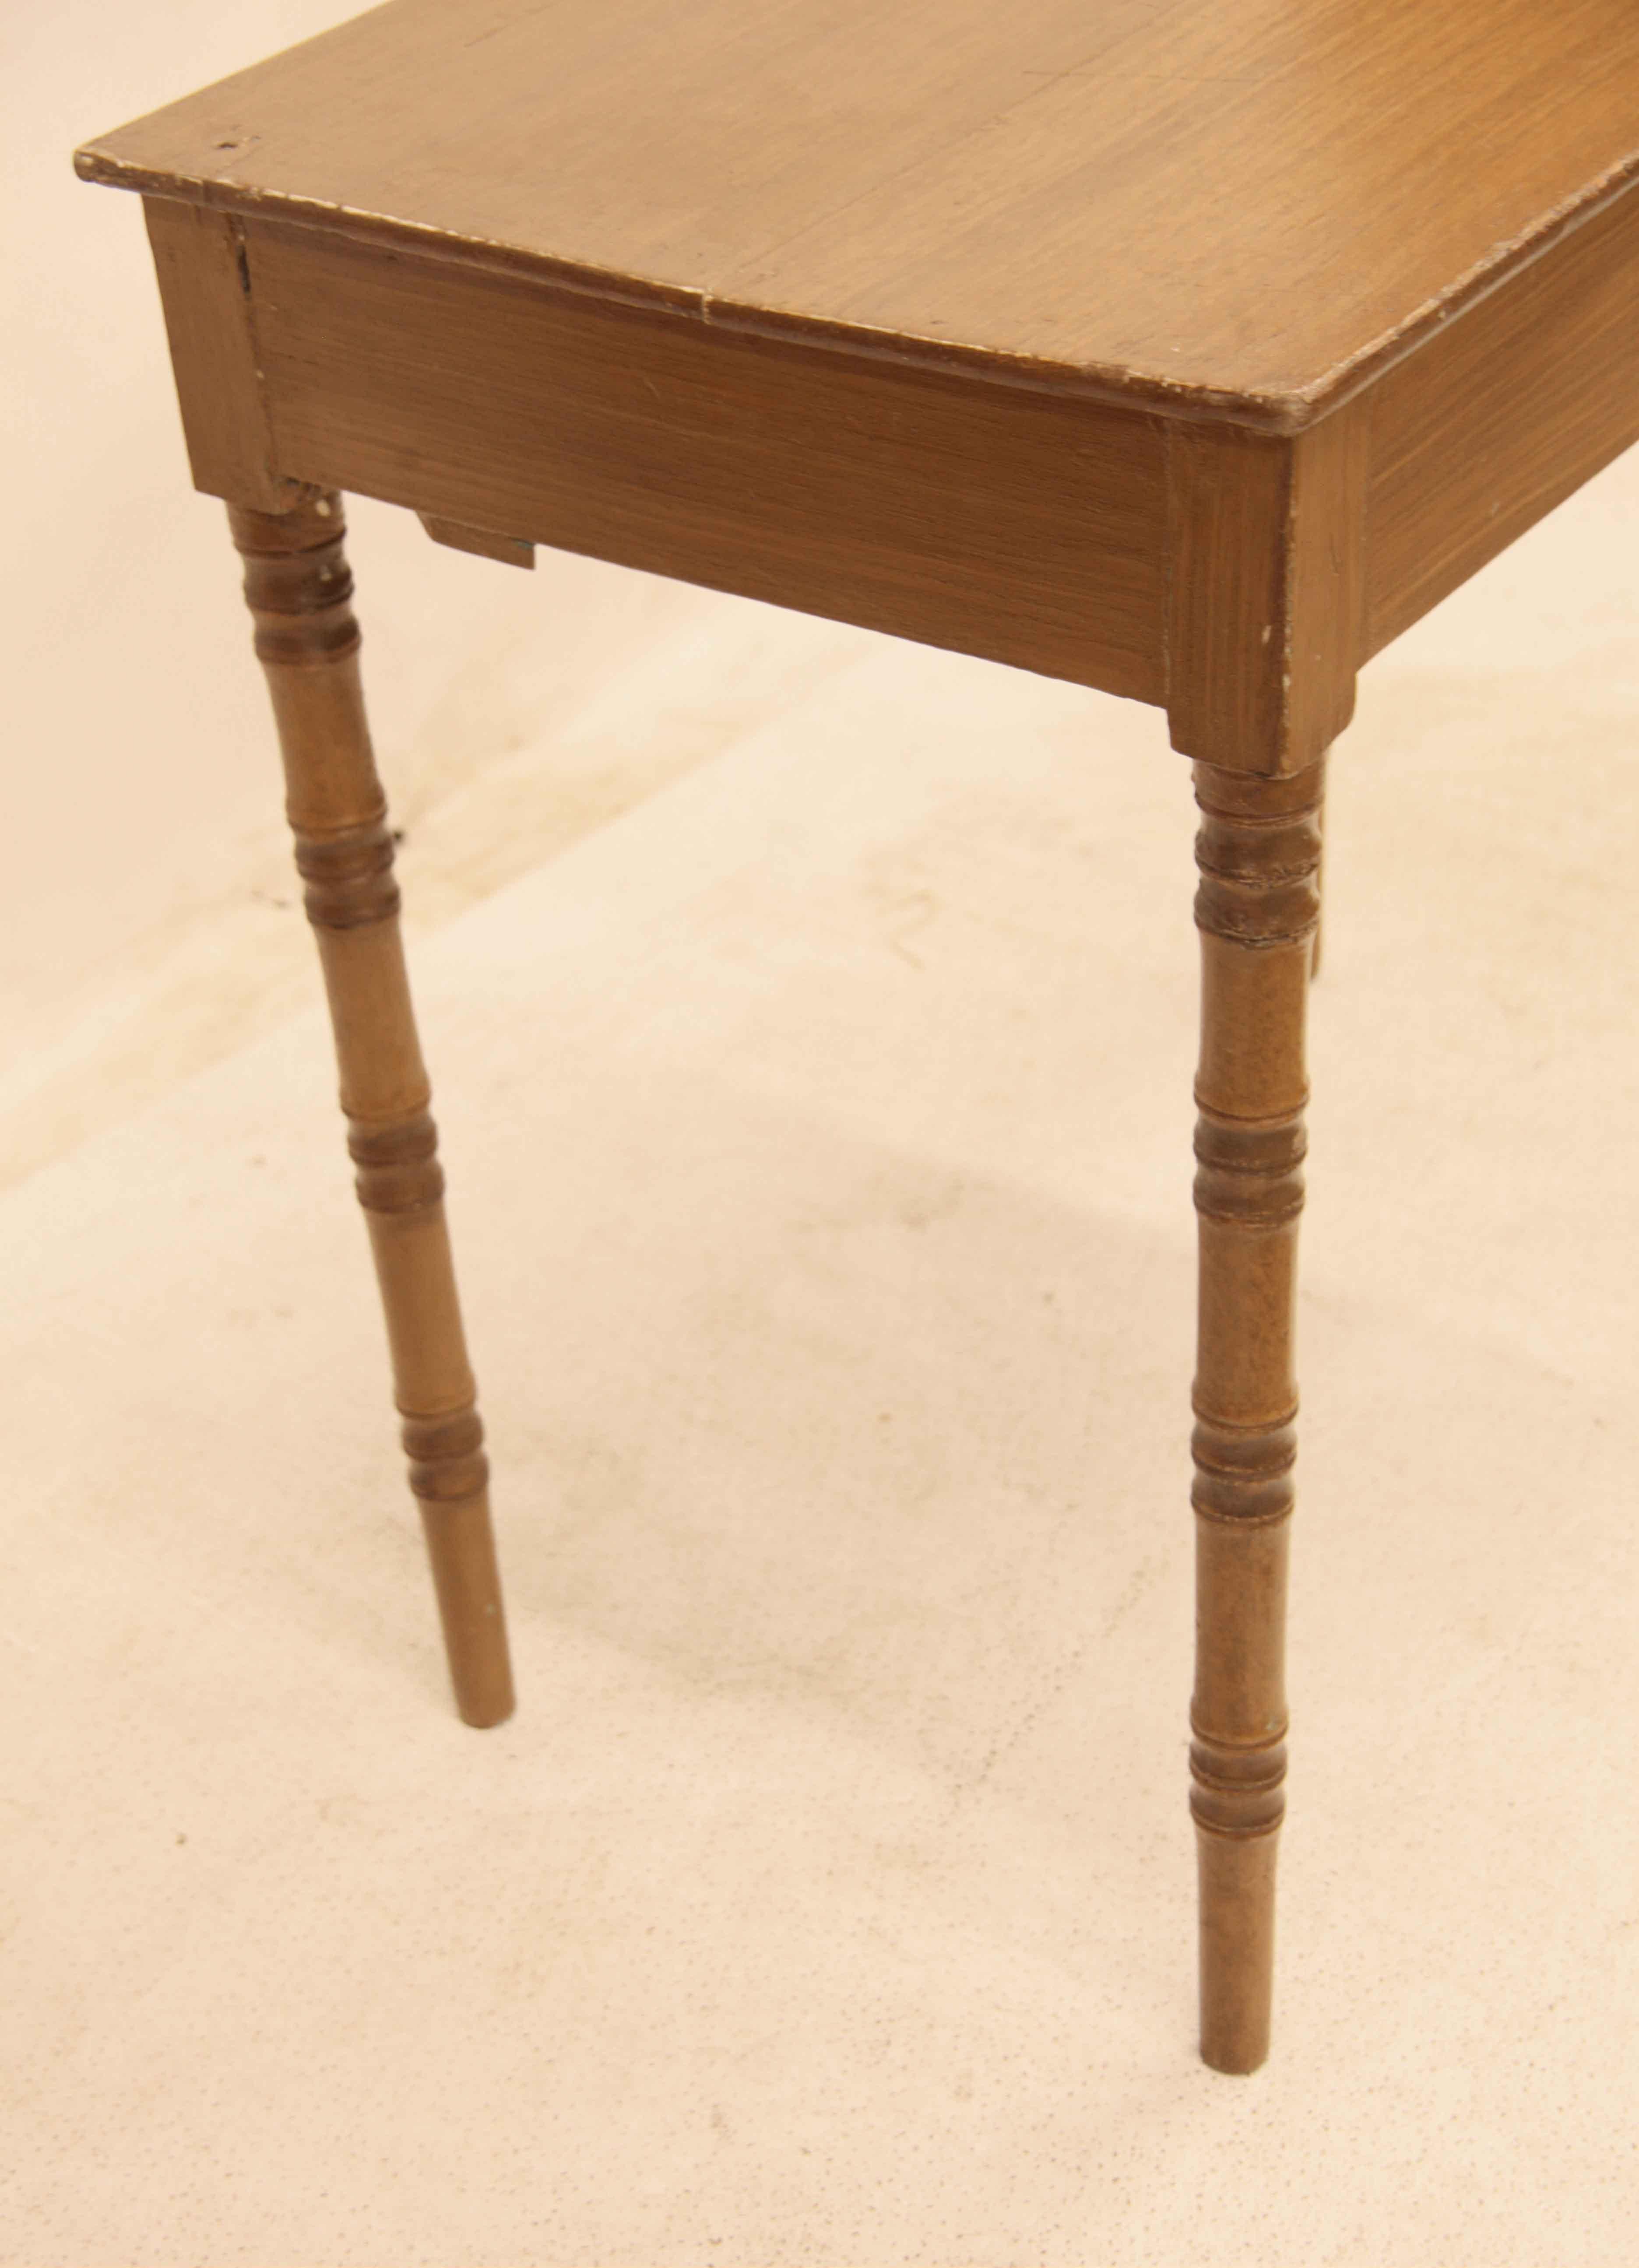 English painted one drawer table,  this table is painted or glazed with a warm faded mahogany color which is very pleasing to the eye, it features delicately turned legs that resemble bamboo.  The single center drawer has a swan neck pull and oval